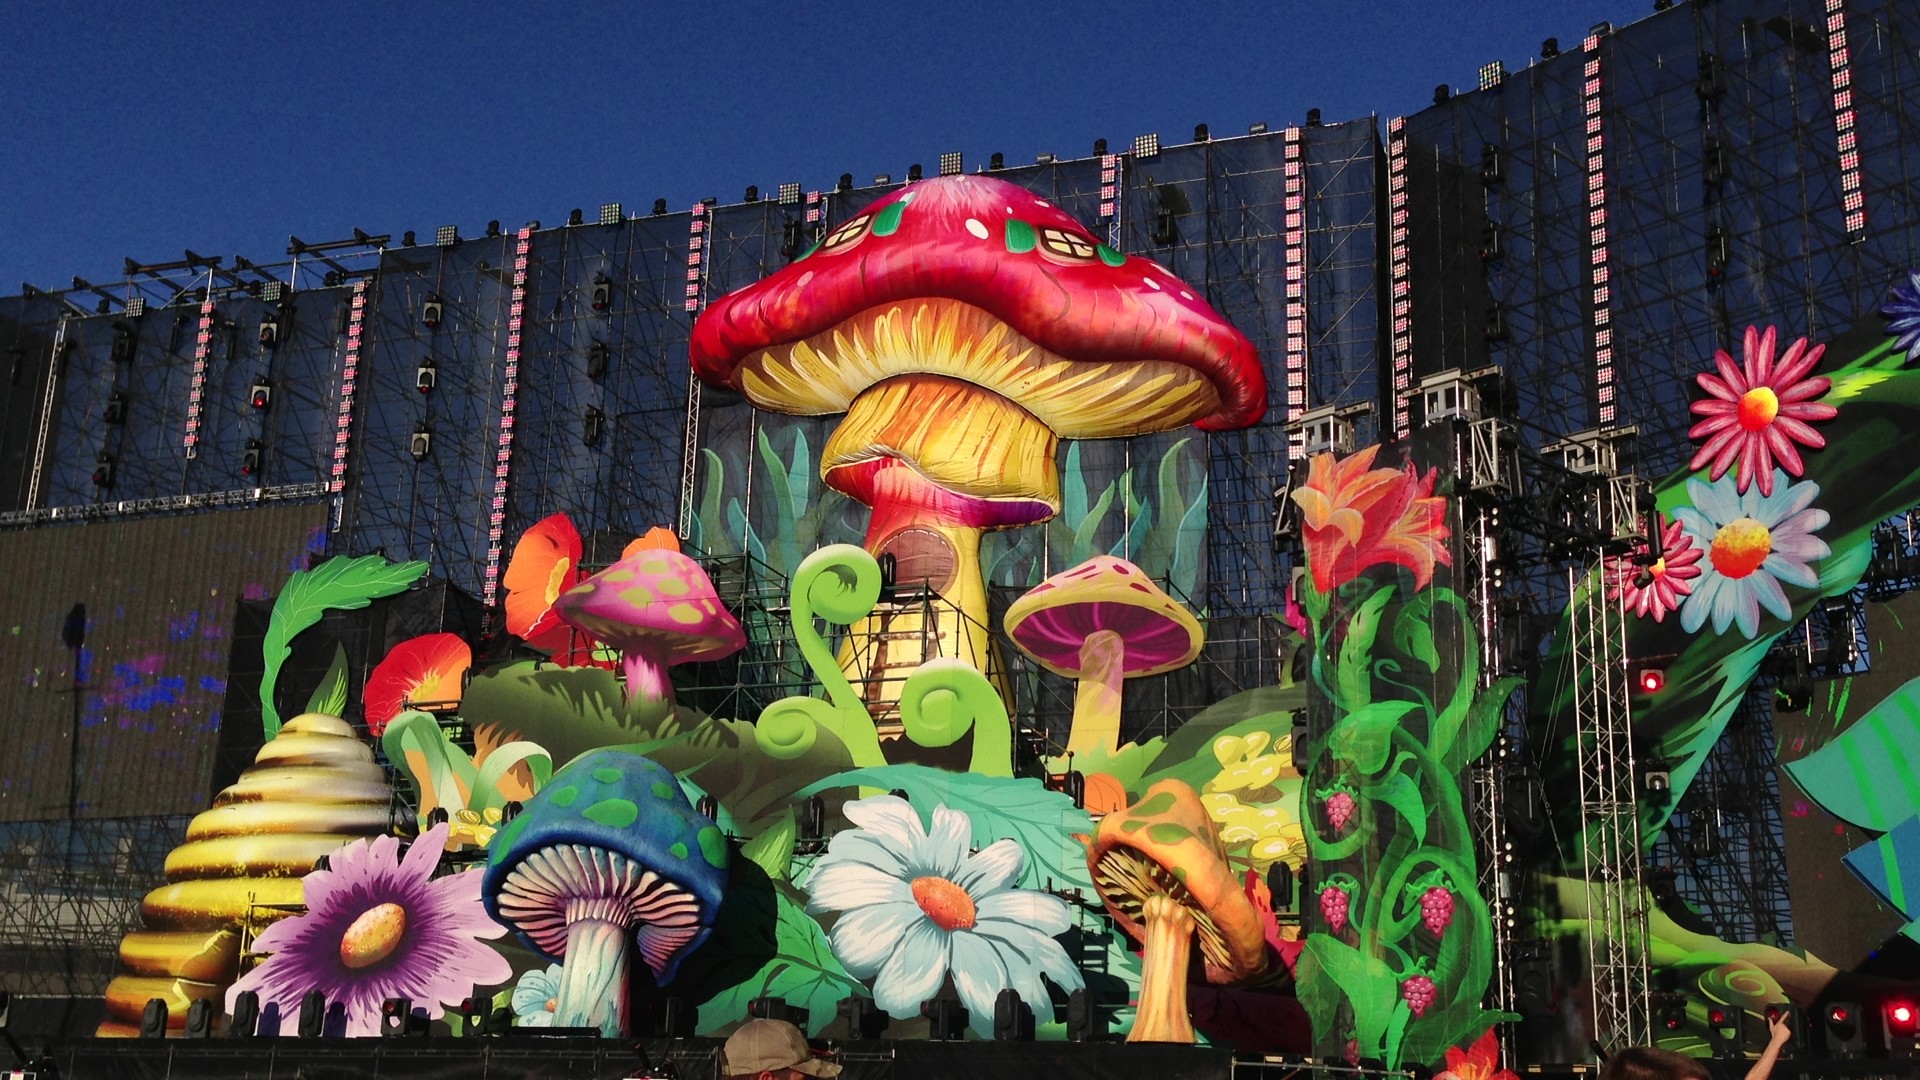 1920x1080 The EDC Mushroom Stage from the 2013 Electric Daisy Carnival